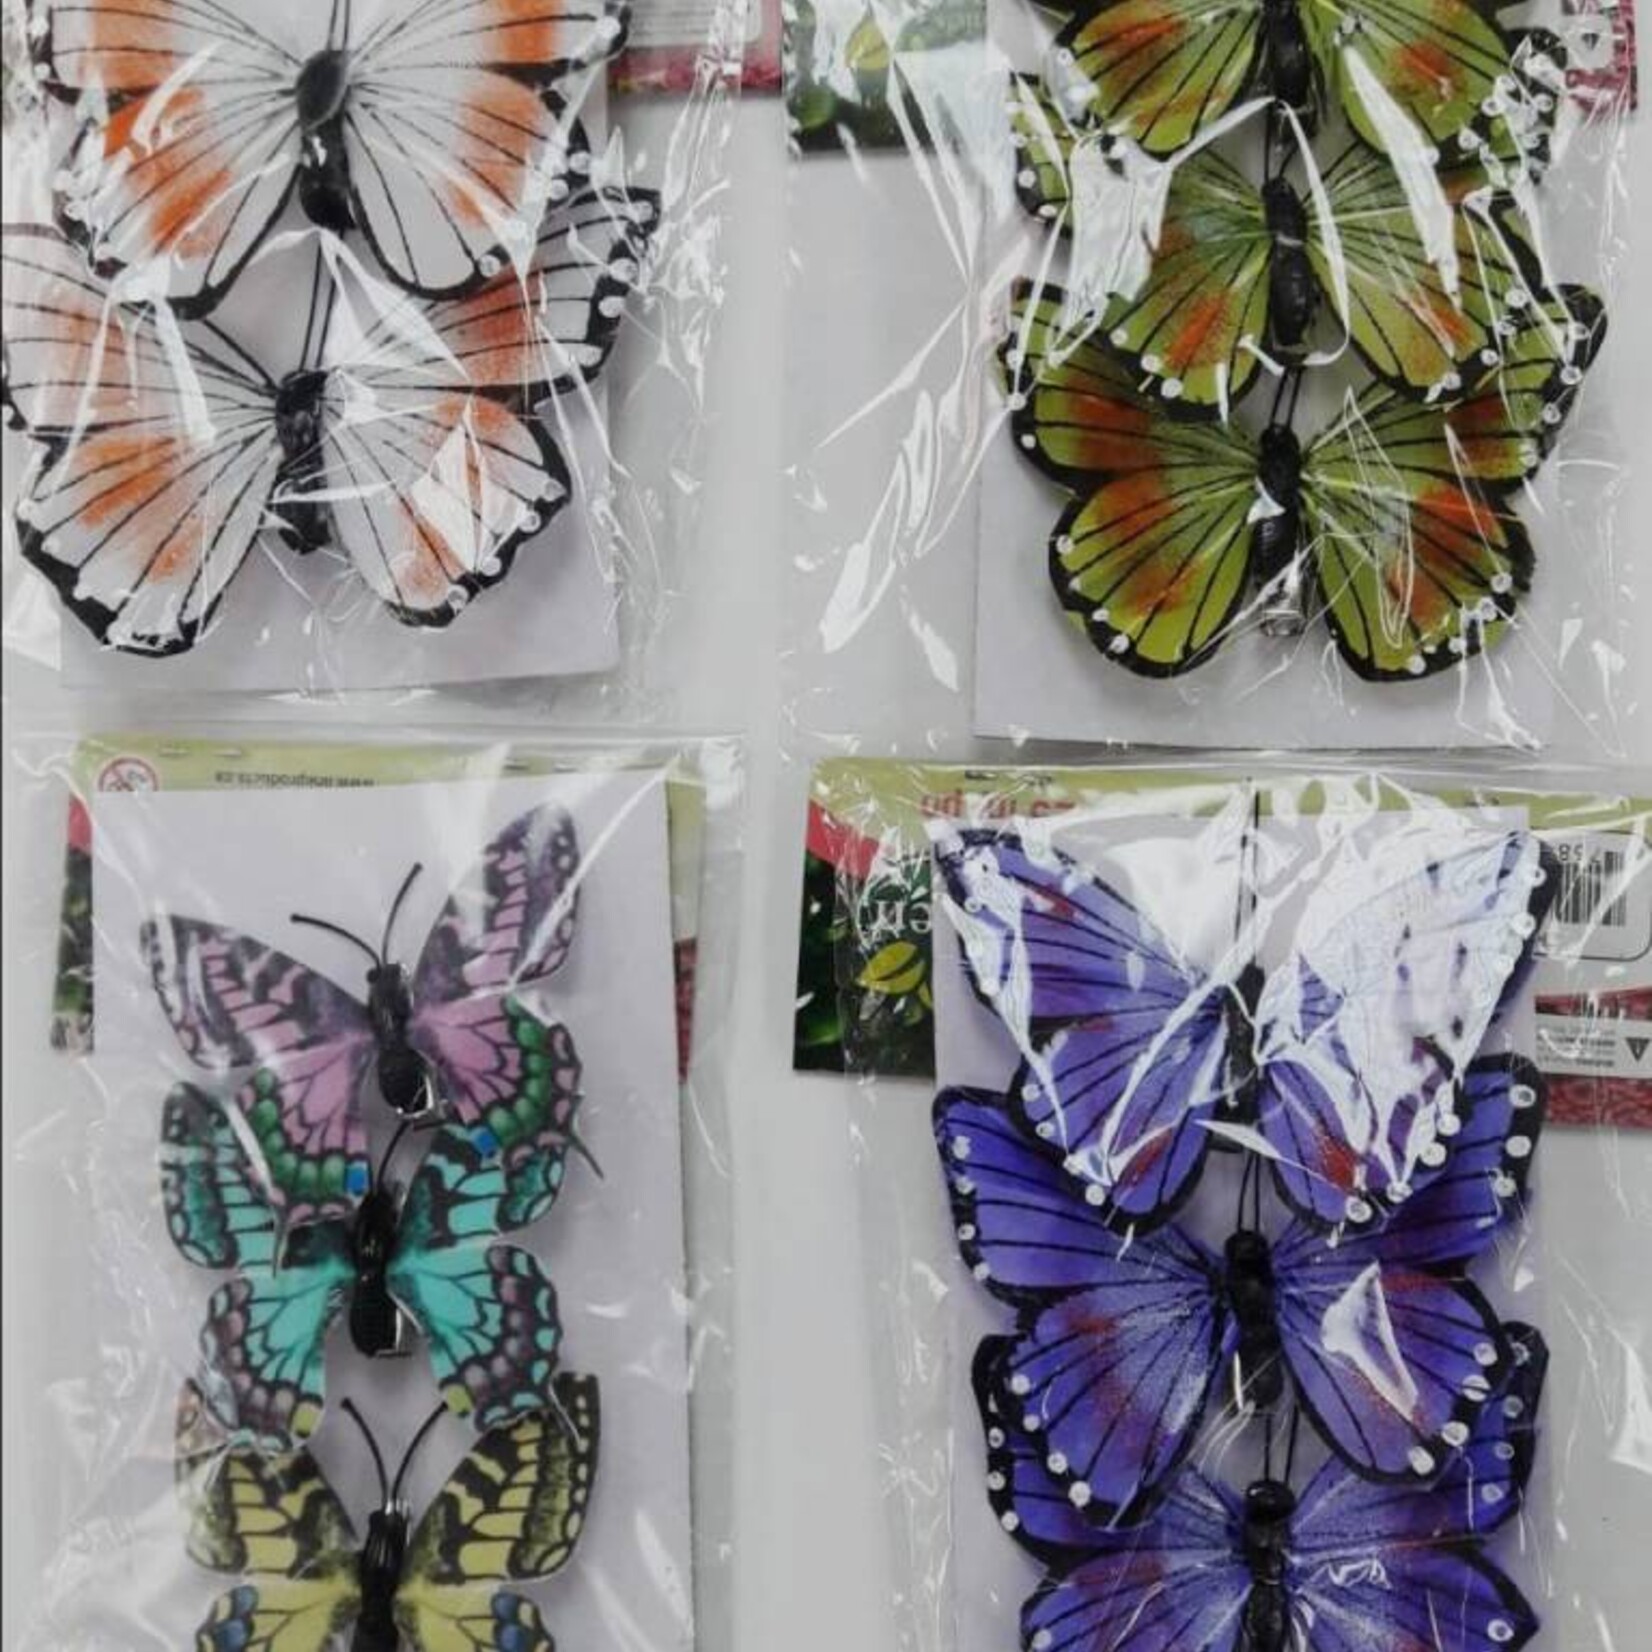 Flocked Printed Butterfly Wire Clip Assortment